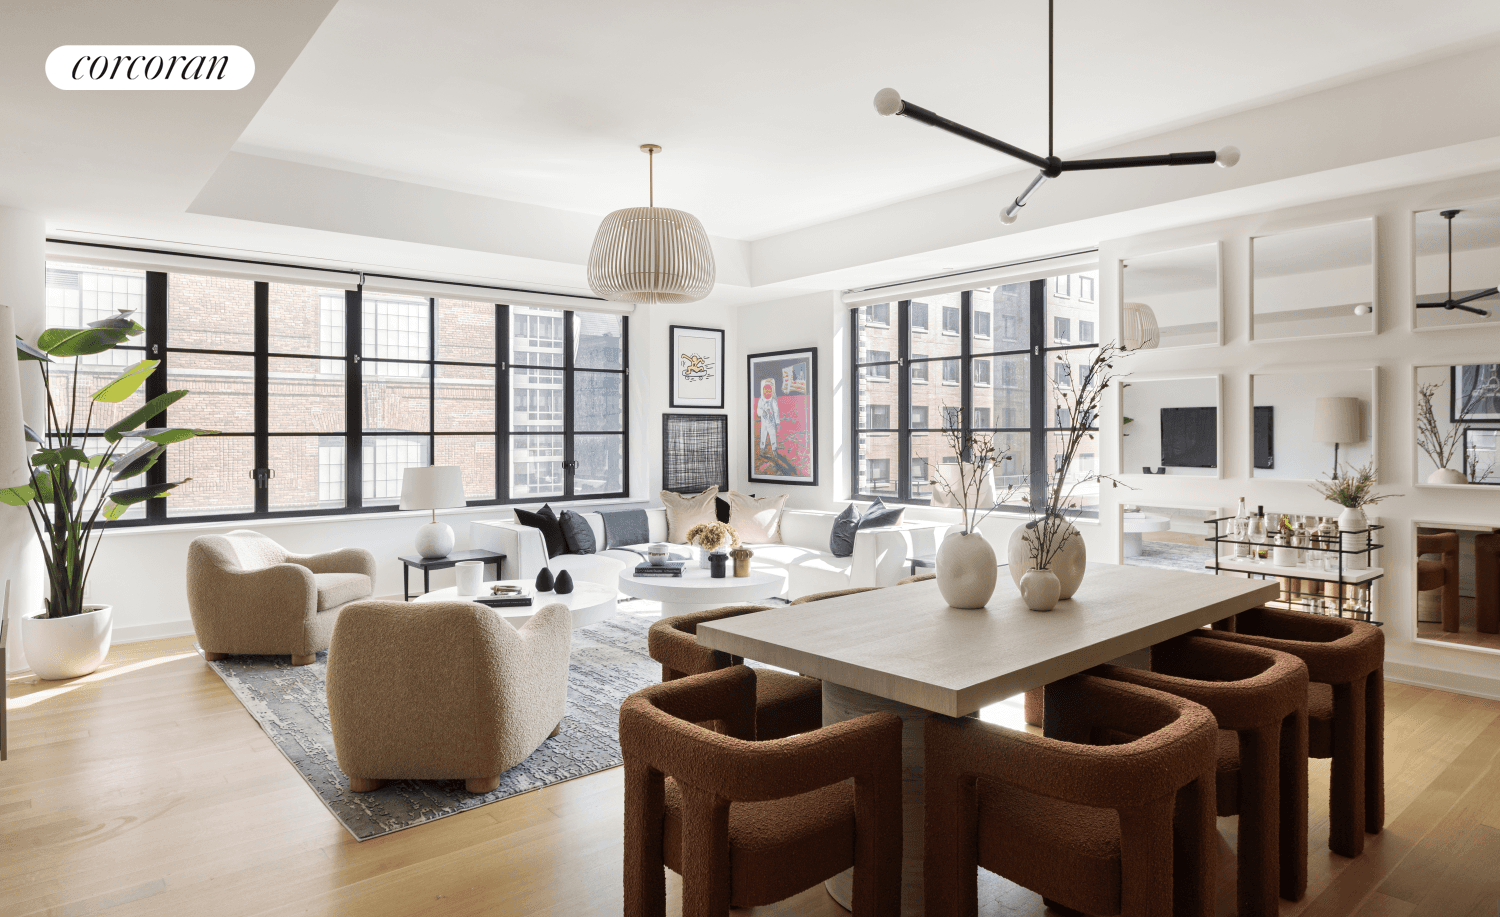 Introducing Five Five Zero, a new West Chelsea condominium boasting 19 exceptional 3 and 4 bedroom units of unparalleled craftsmanship.